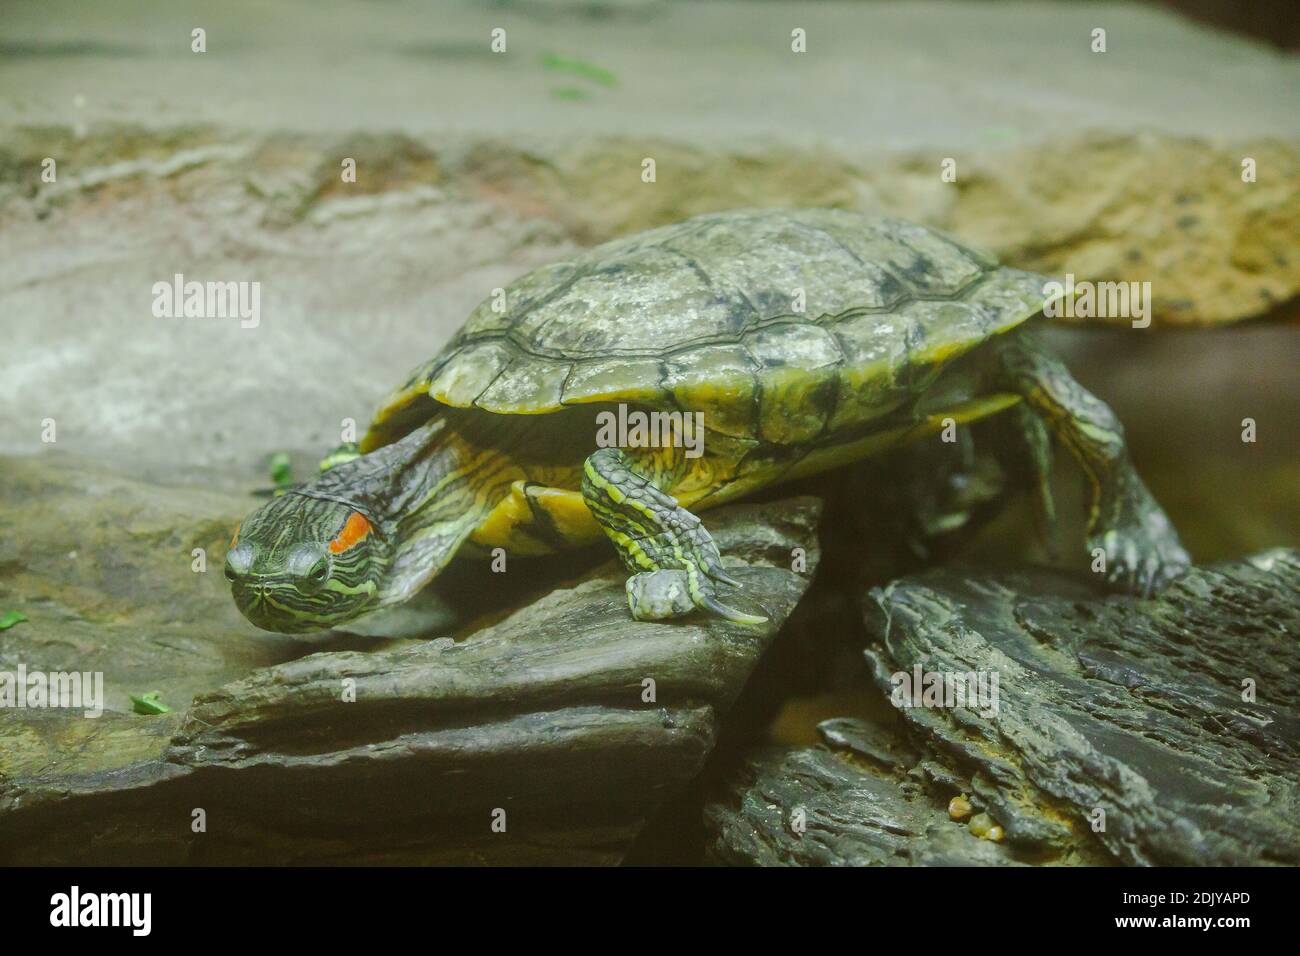 Trachemys Scripta Is On A Rock A Freshwater Turtle Is Native To North America. Stock Photo